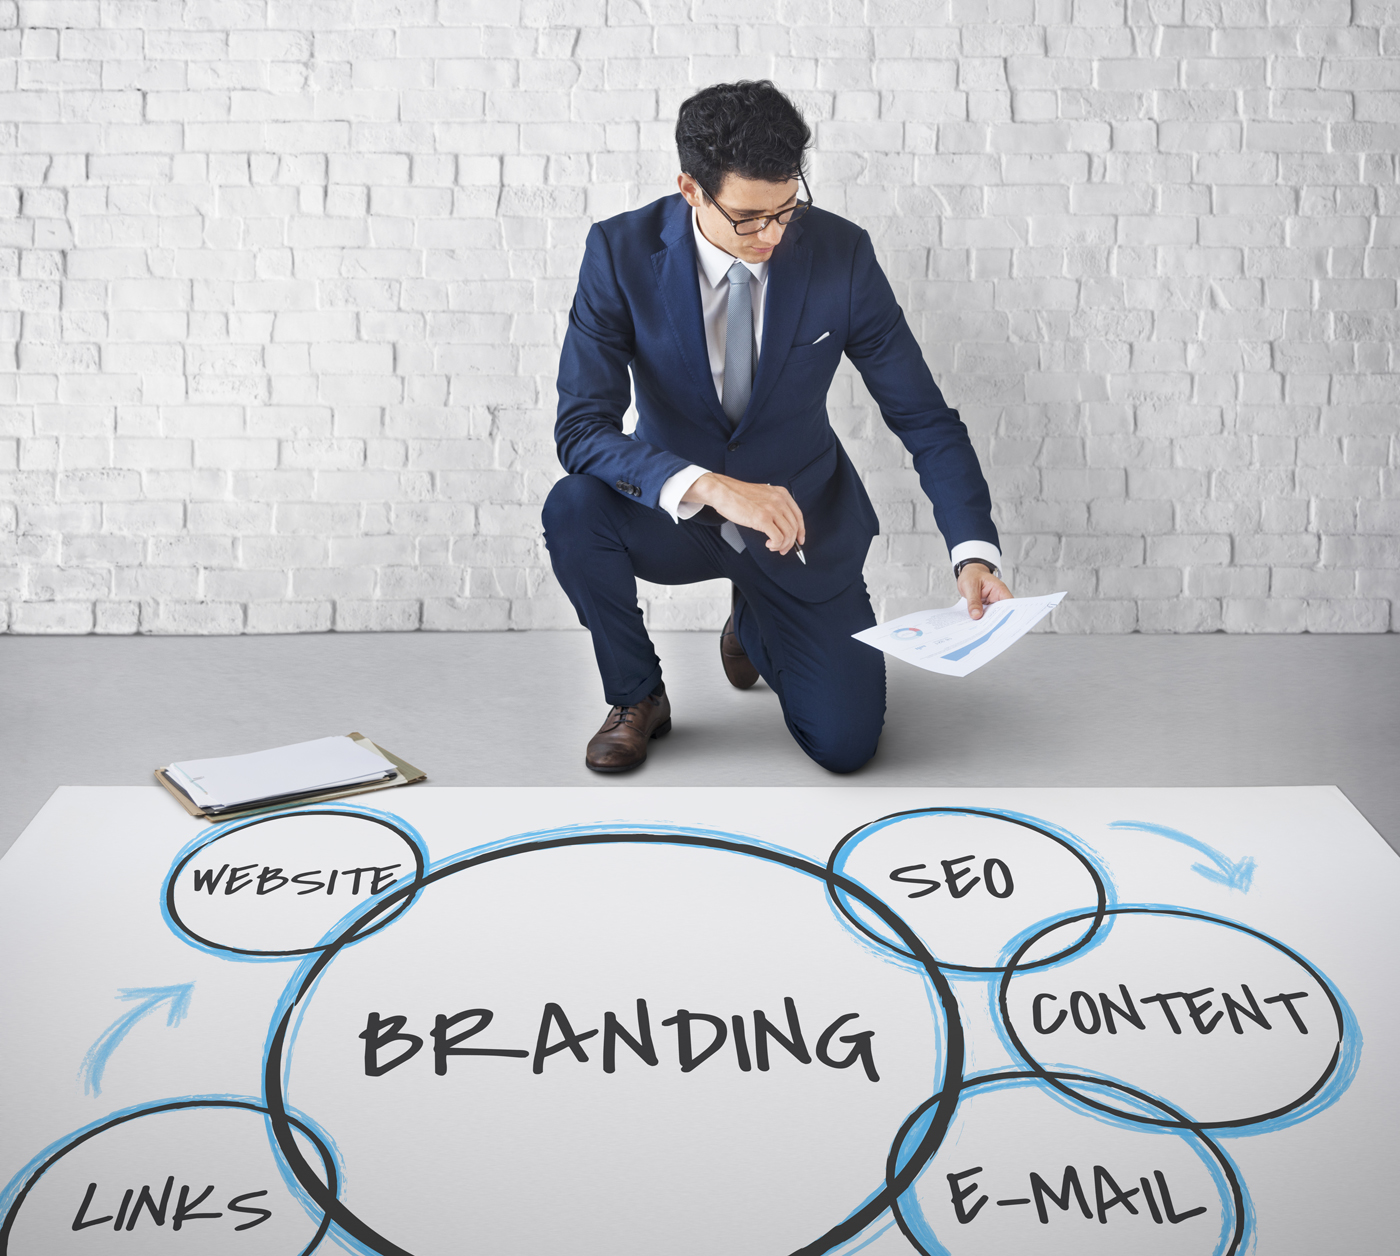 Digital branding and how it can help businesses to grow?